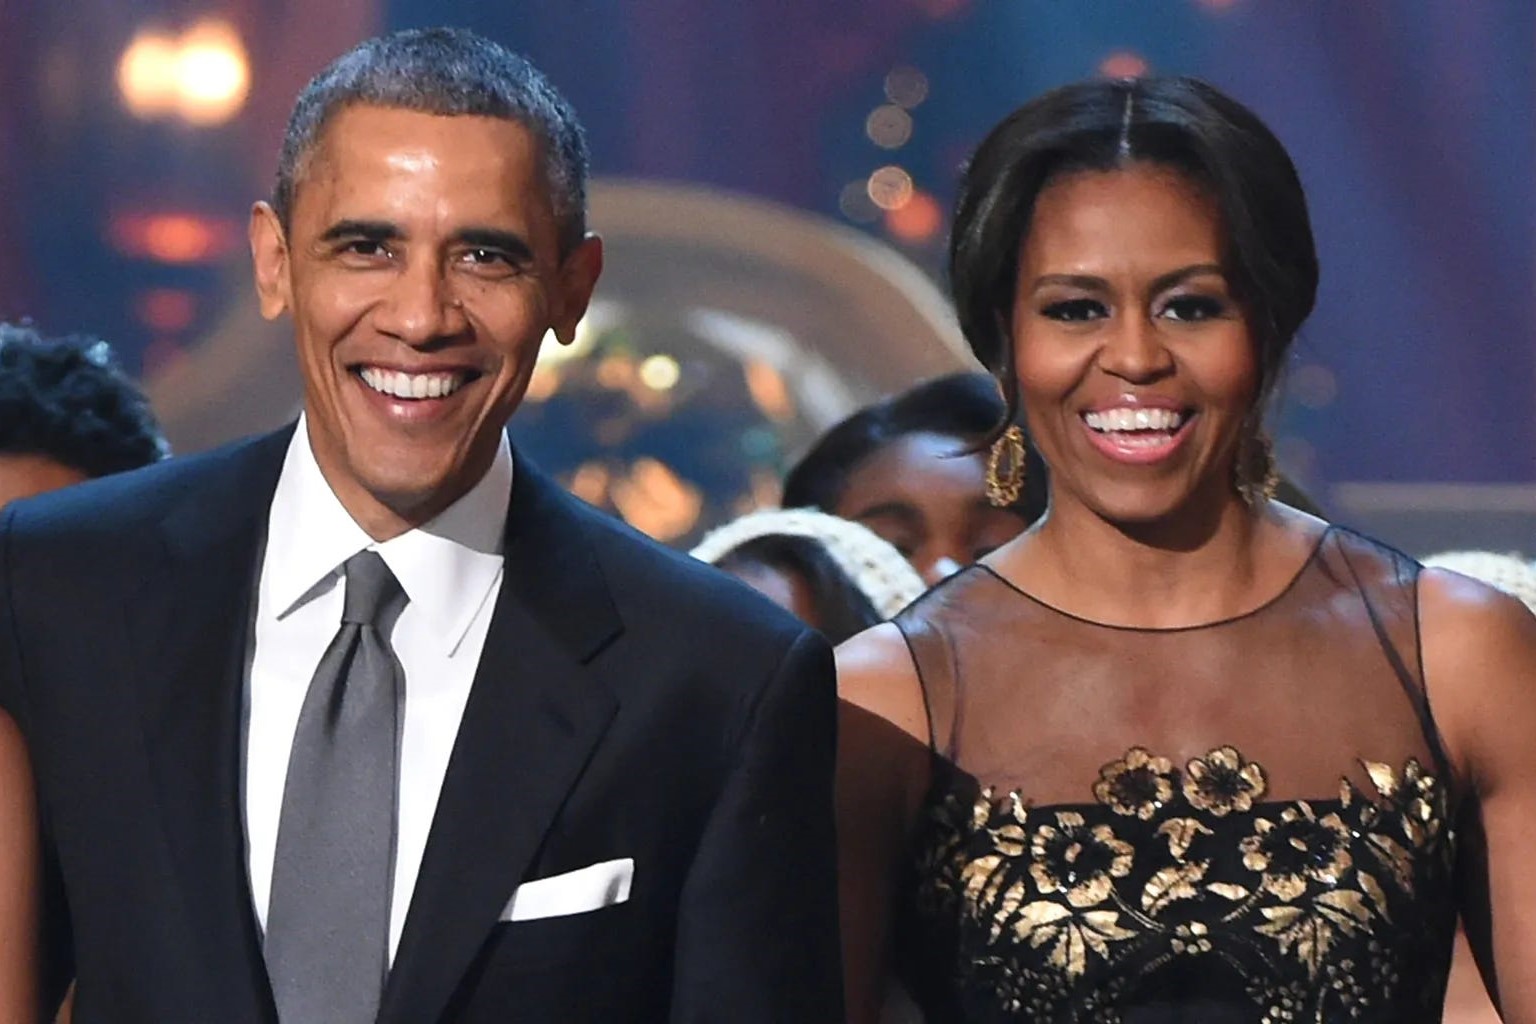 Shocking Photo Reveals Obama’s Secret Connection To Michelle’s Lookalike Brother! Plus, Rare Photos Of Michelle Pregnant And With Newborn Daughters!